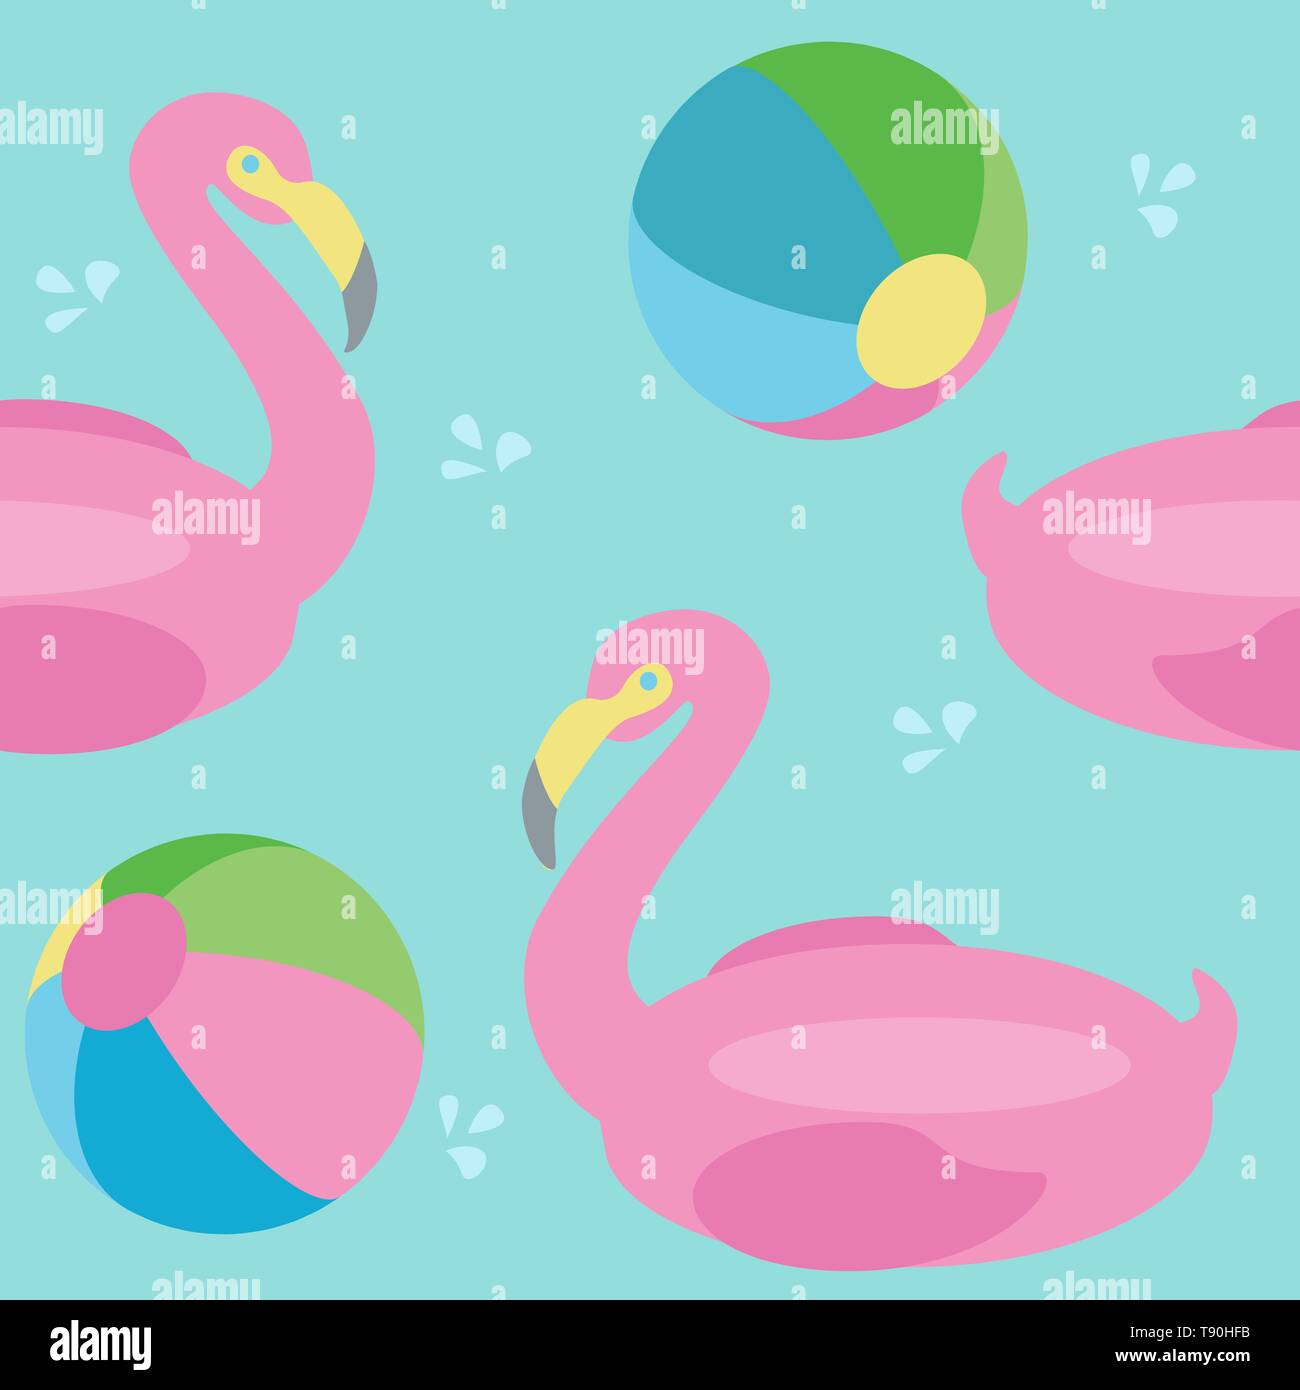 Flamingo floats and ball on swimming pool seamless pattern vector. Summer tile illustration. Swatches included. Stock Vector